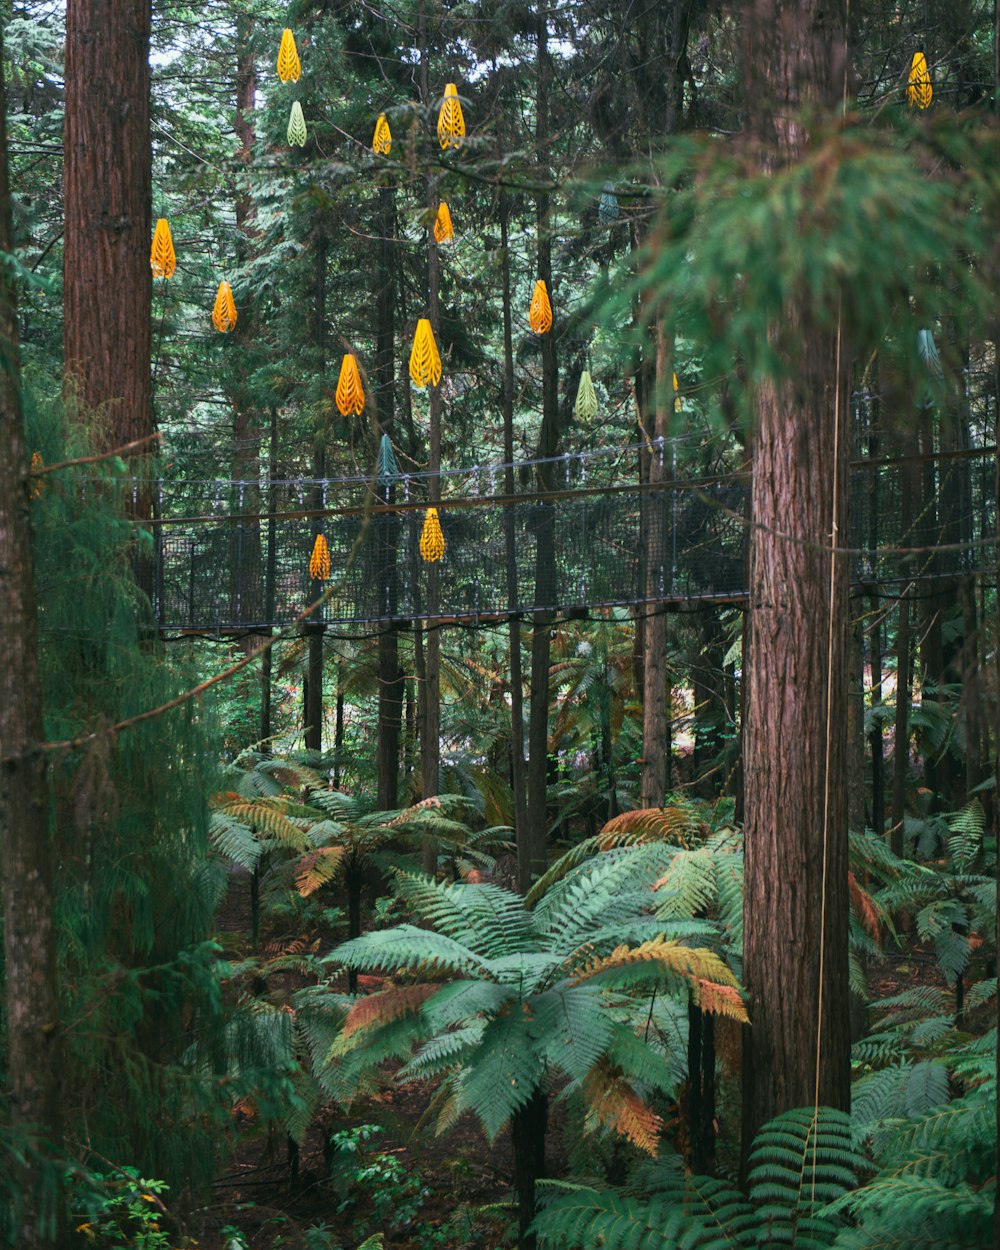 a forest filled with lots of trees covered in yellow flowers